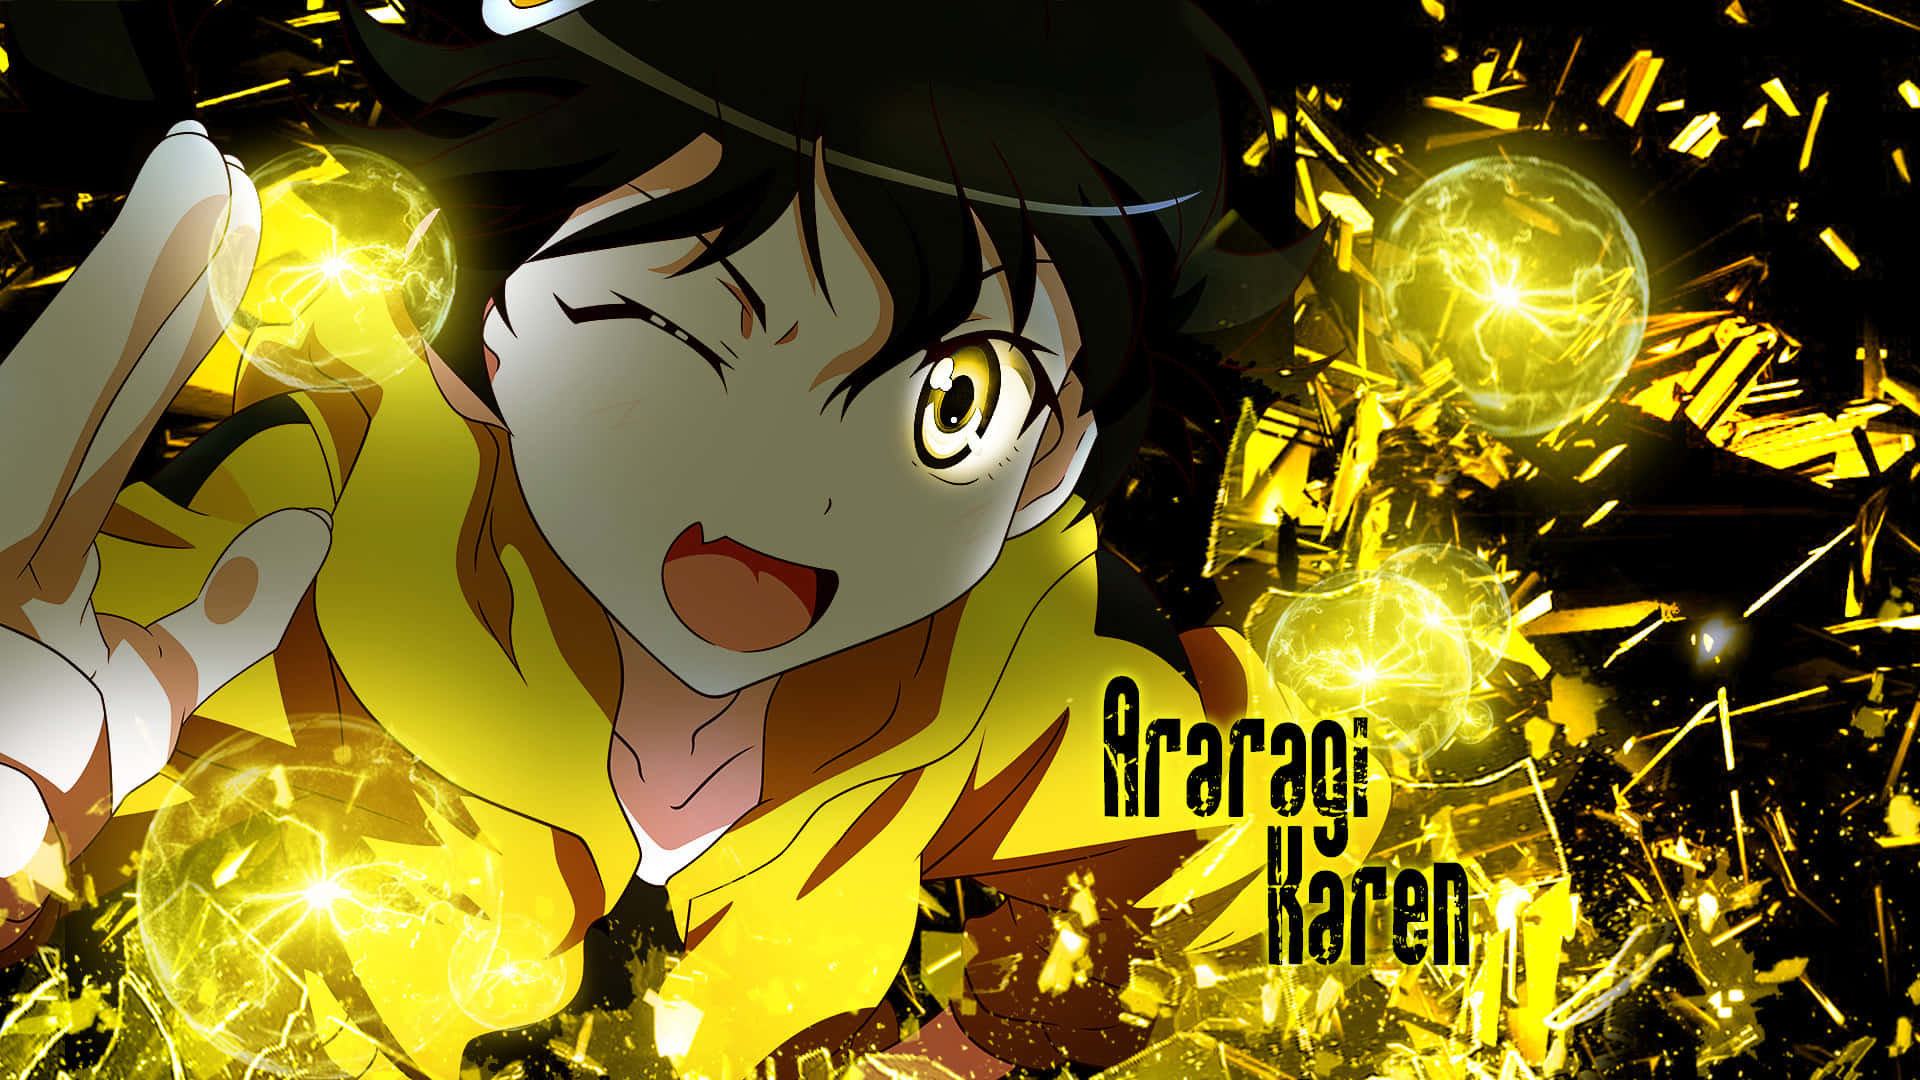 A Character With A Yellow Hat And Yellow Sparks